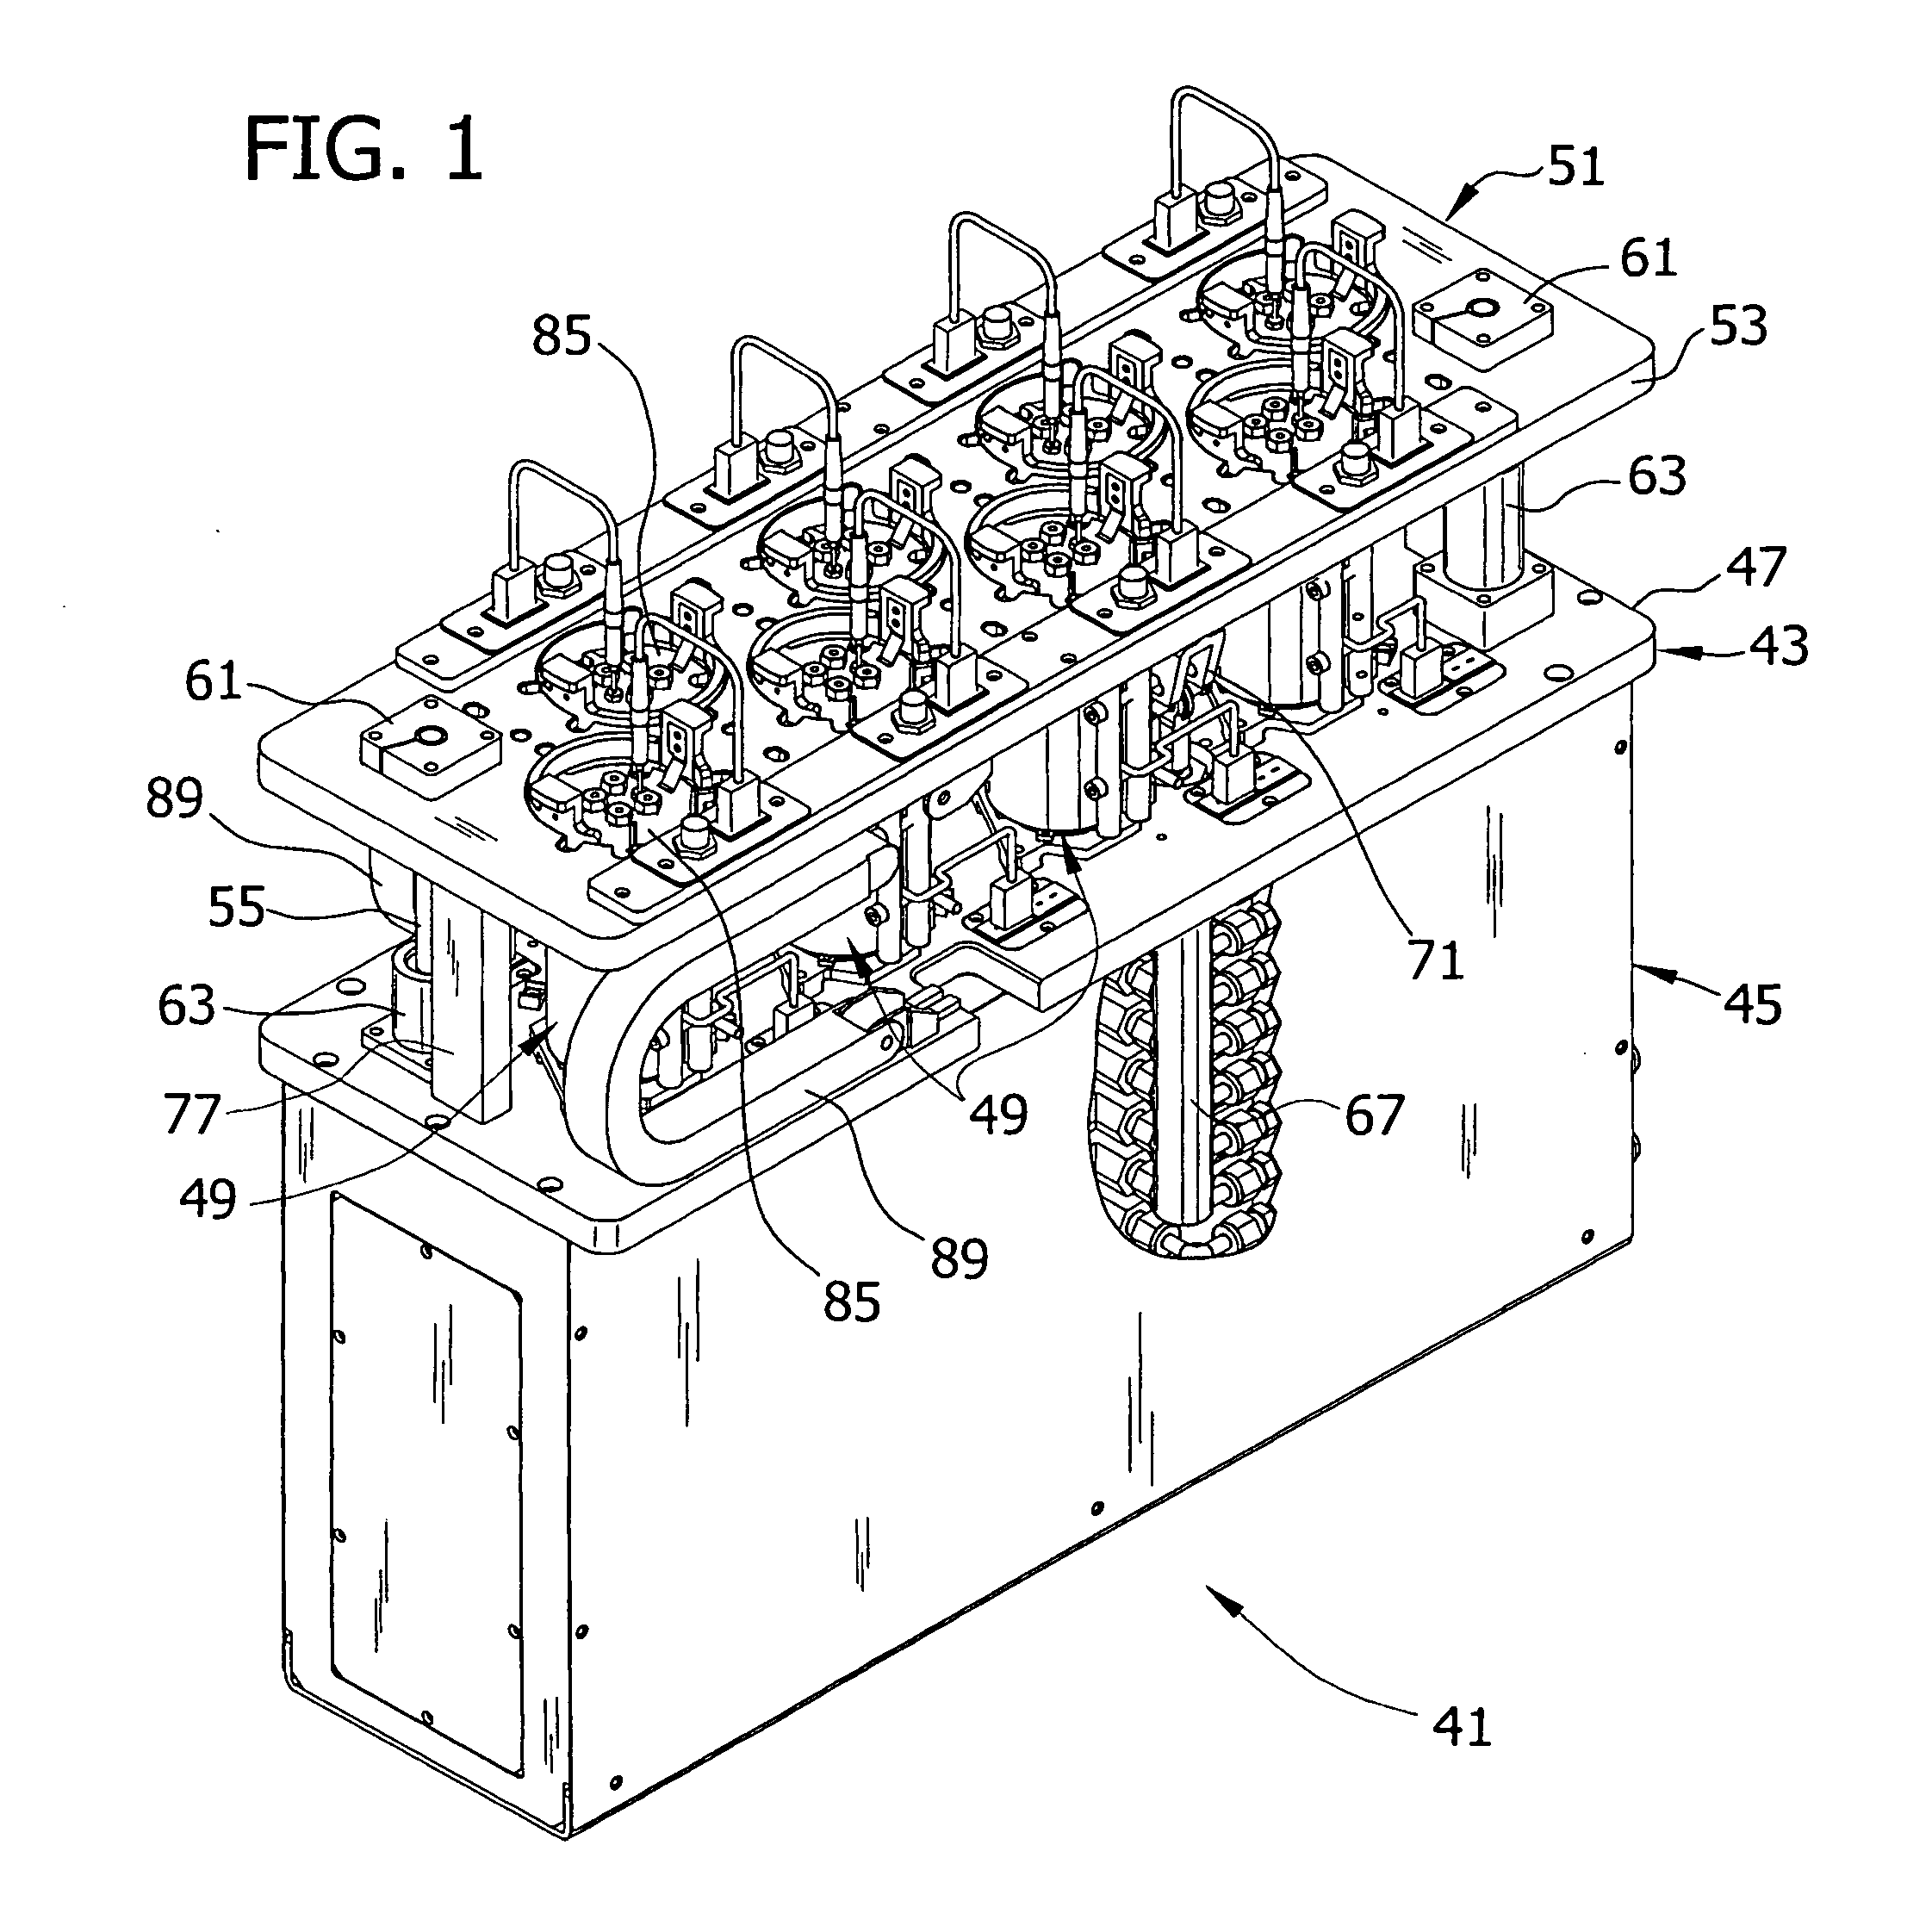 Pressurized reactor apparatus with magnetic stirring